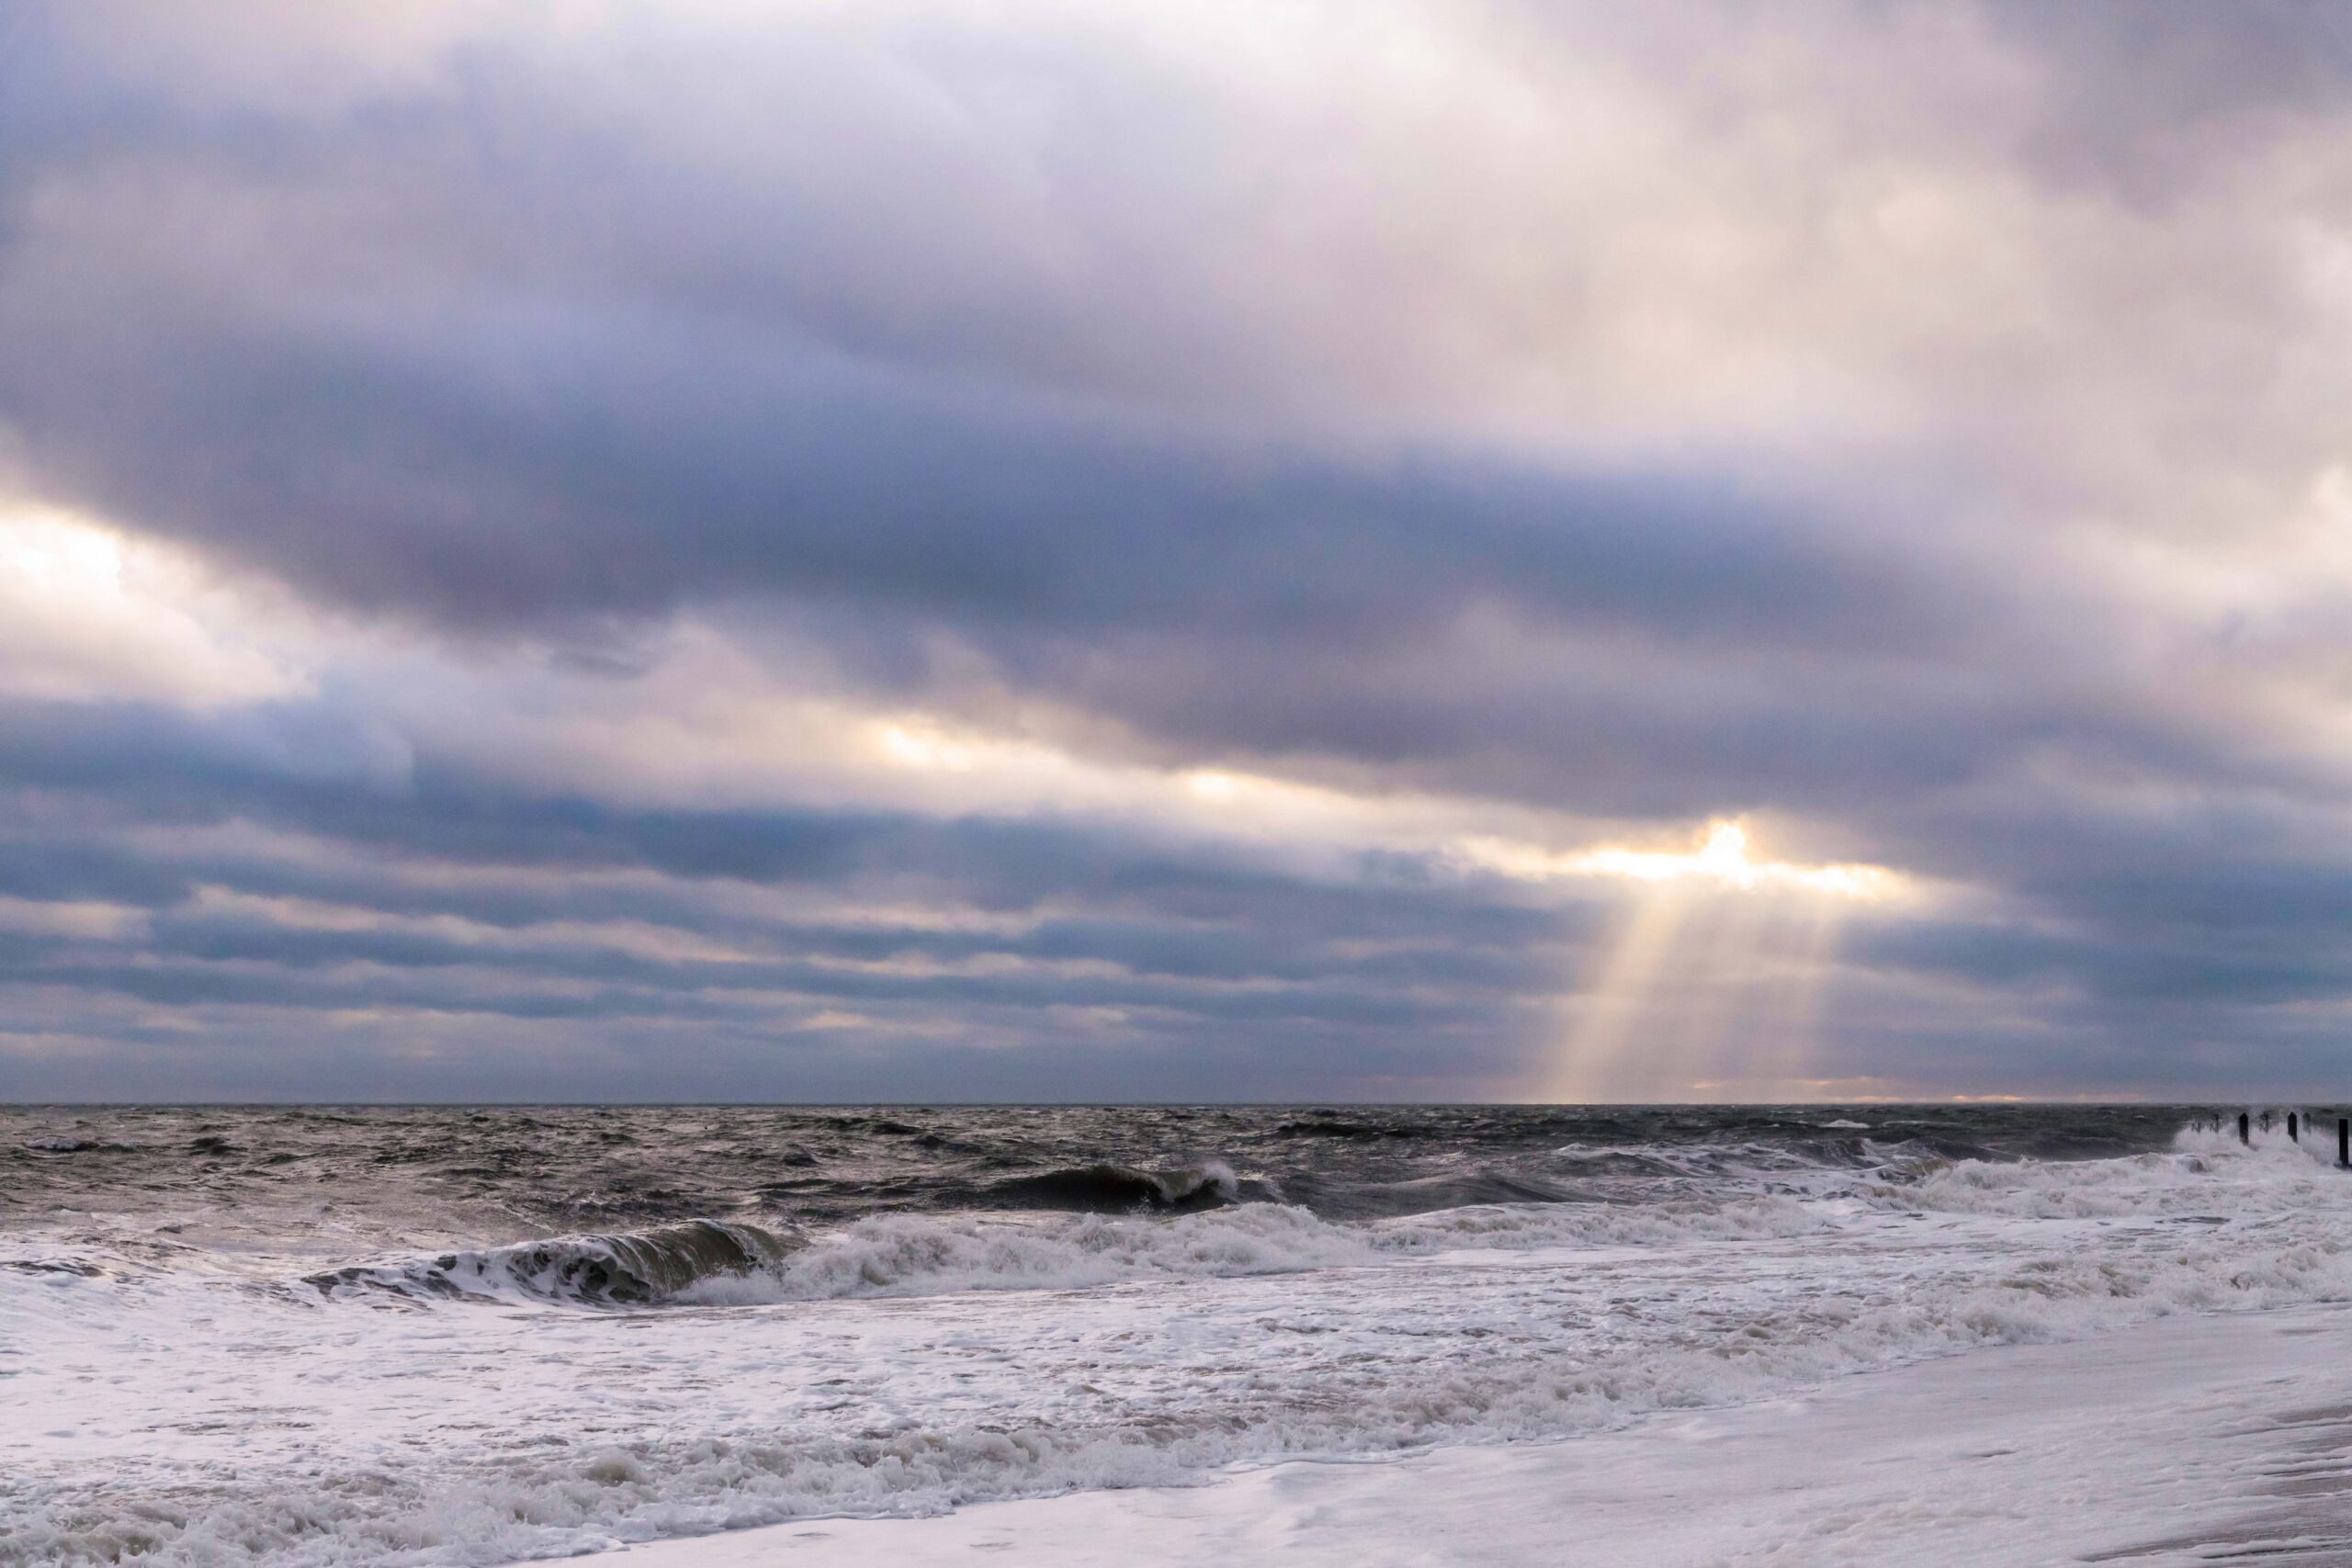 Sunlight streaming through blue and gray muddy dark clouds with the ocean churning and waves crashing on the beach